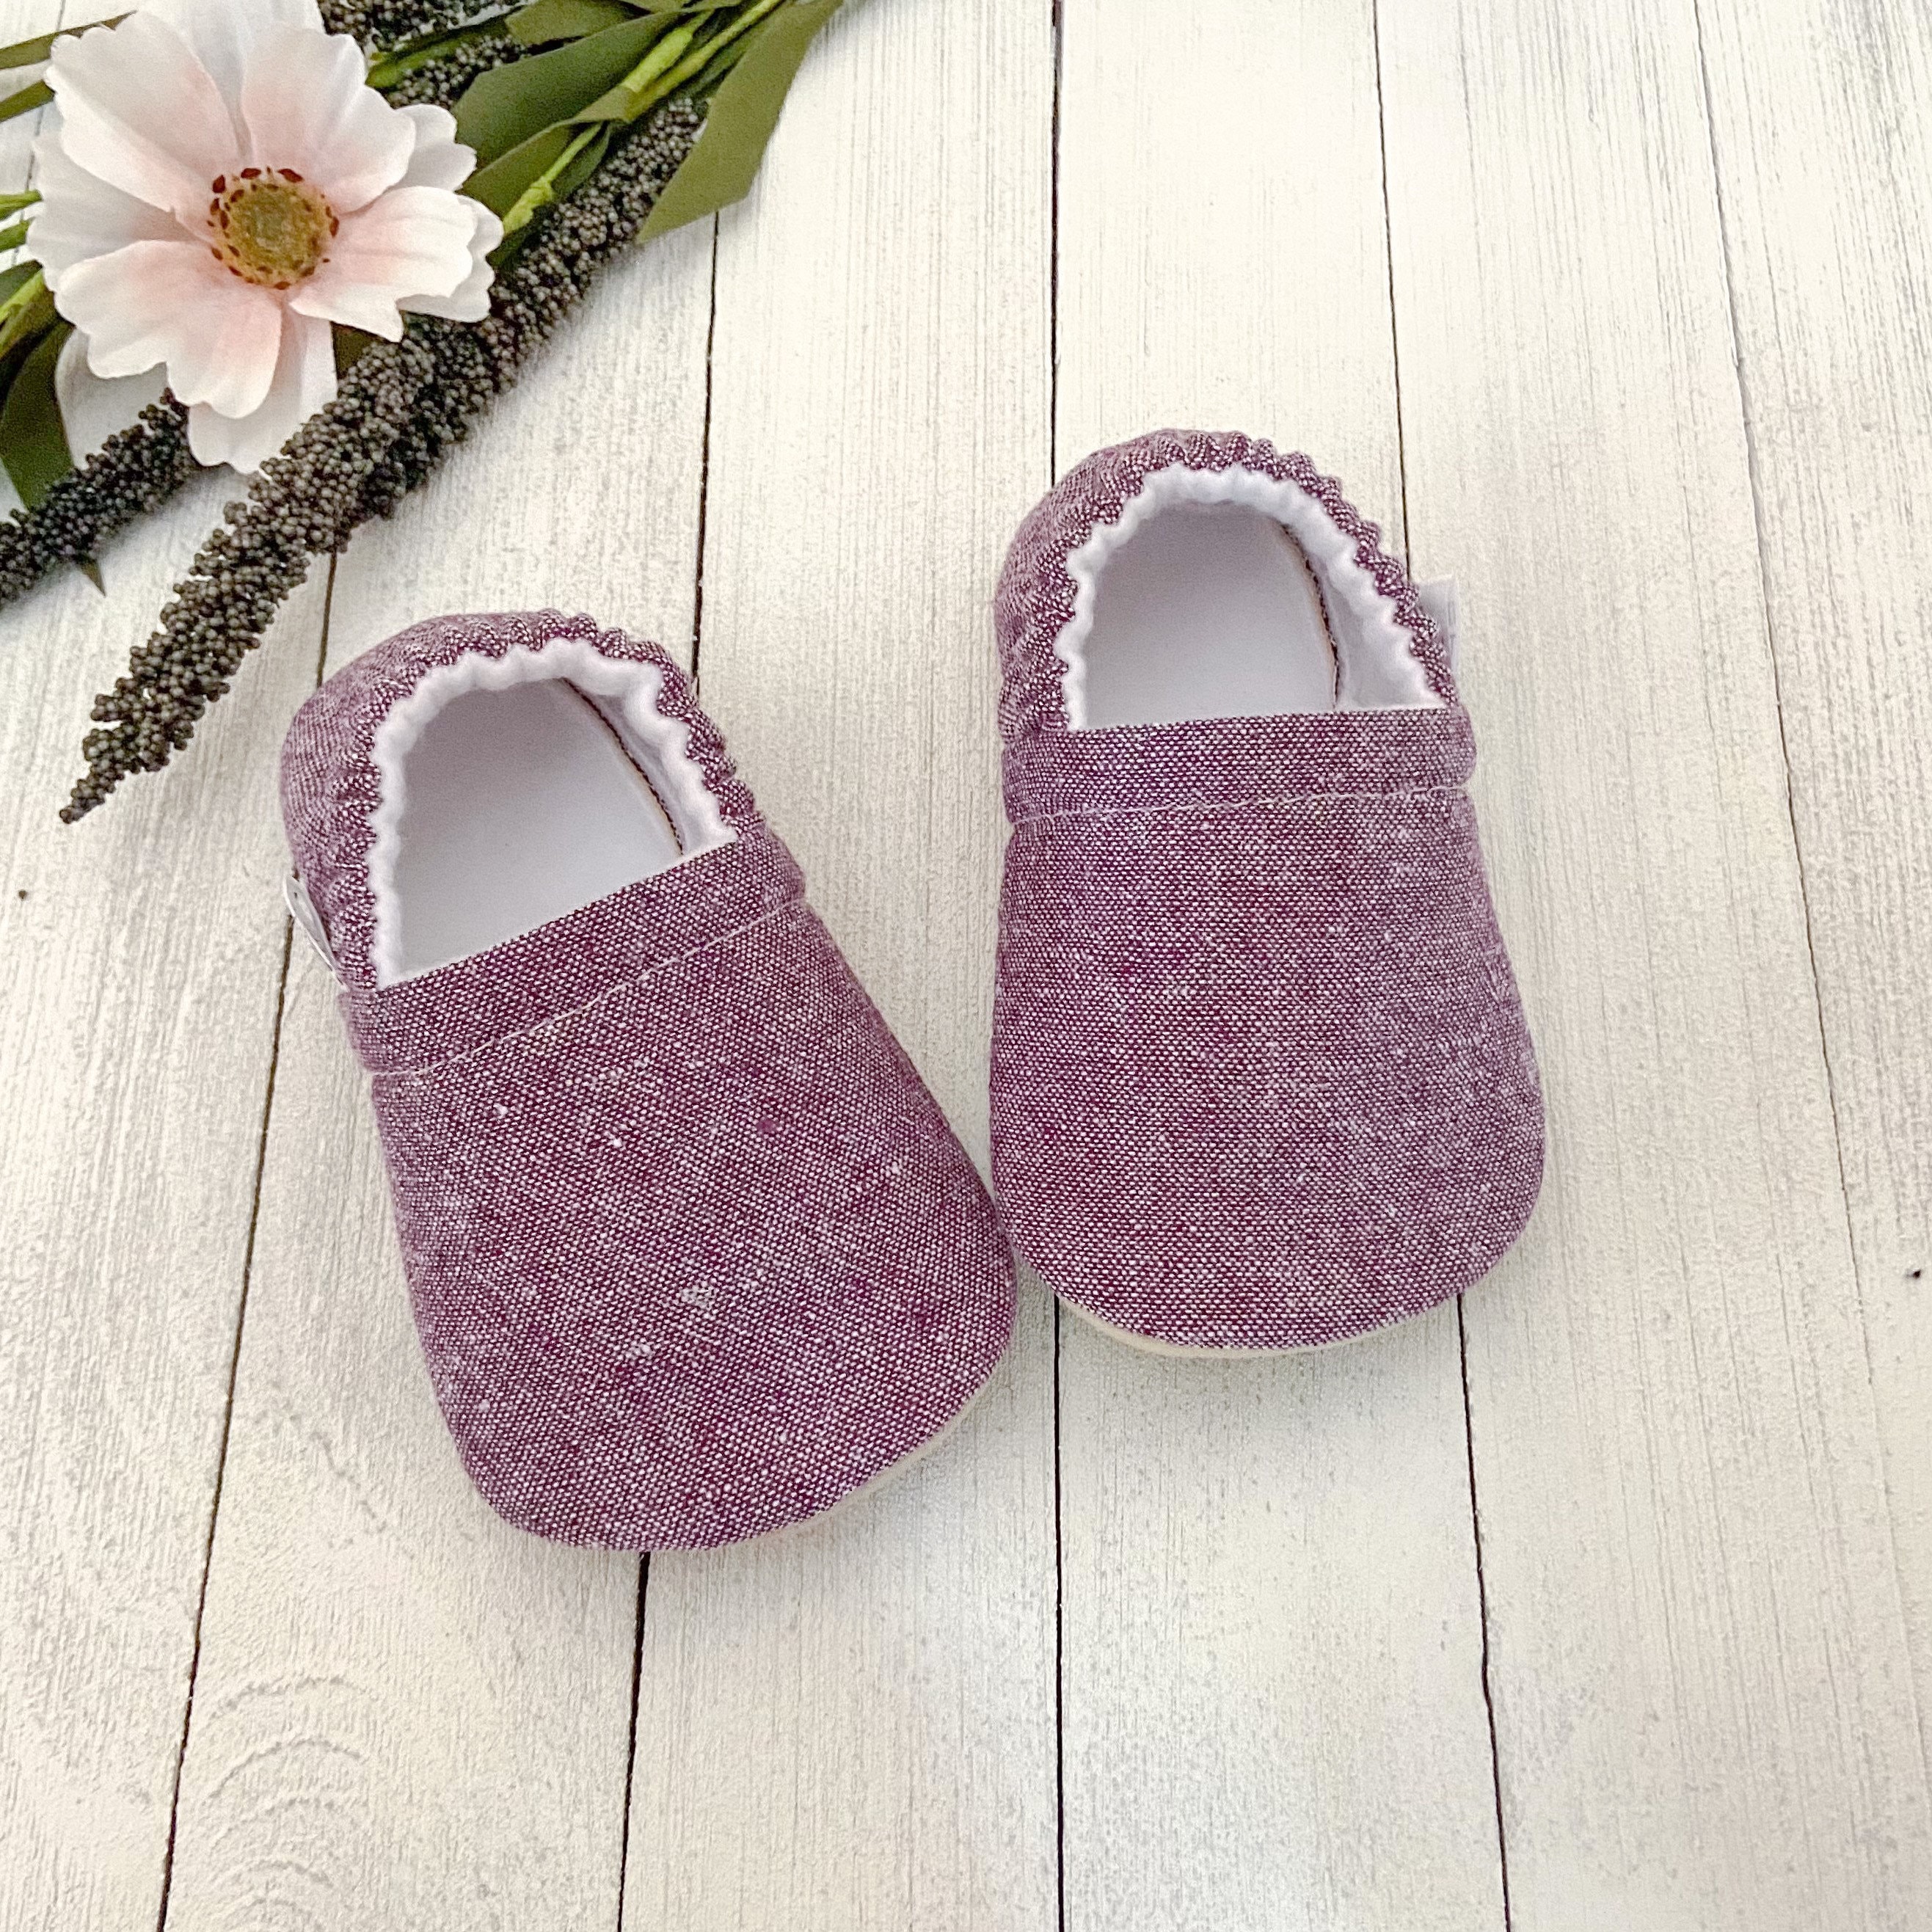 Plum Linen Blend Baby Booties, Slippers, Crib Shoes, Soft Sole, Moccasins, Shoes